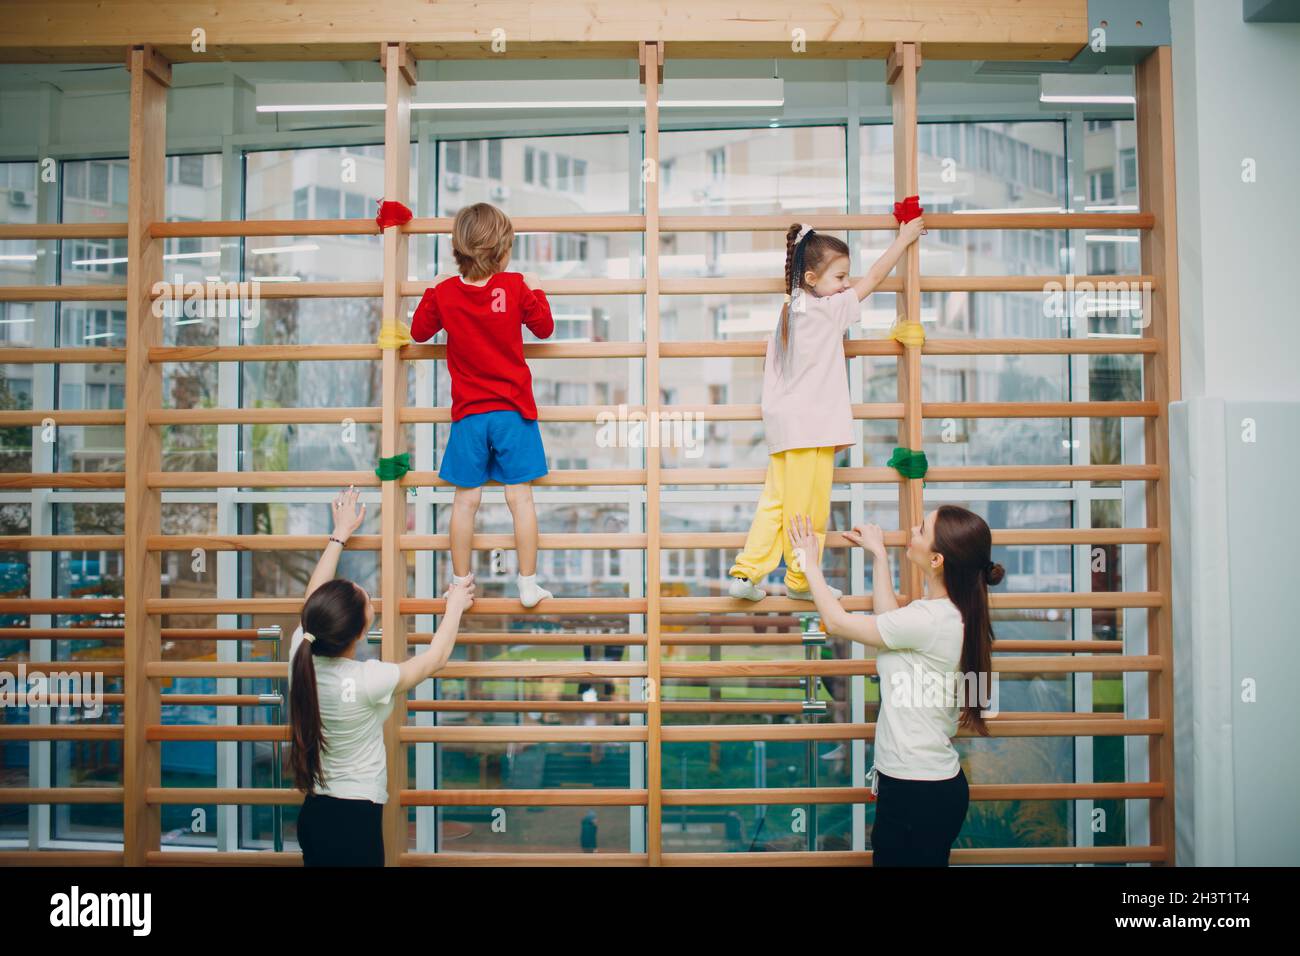 Kids at Swedish wall exercises in gym at kindergarten or elementary school with teachers. Children sport and fitness concept. Stock Photo